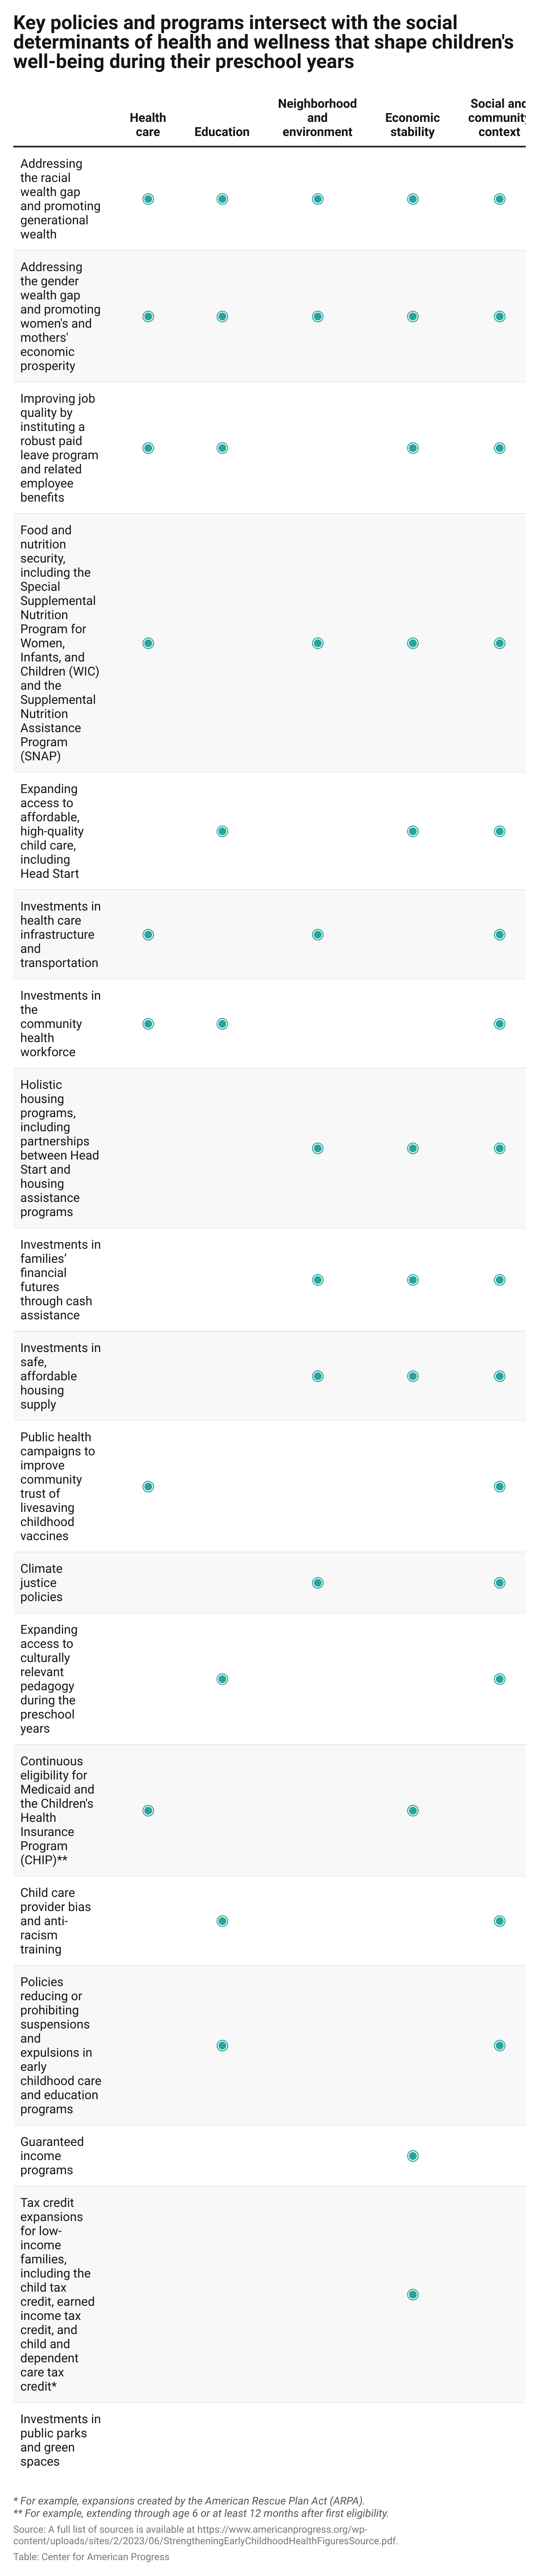 Table showing where key policies and programs intersect with the social determinants of health and wellness that shape children's well-being during their preschool year.